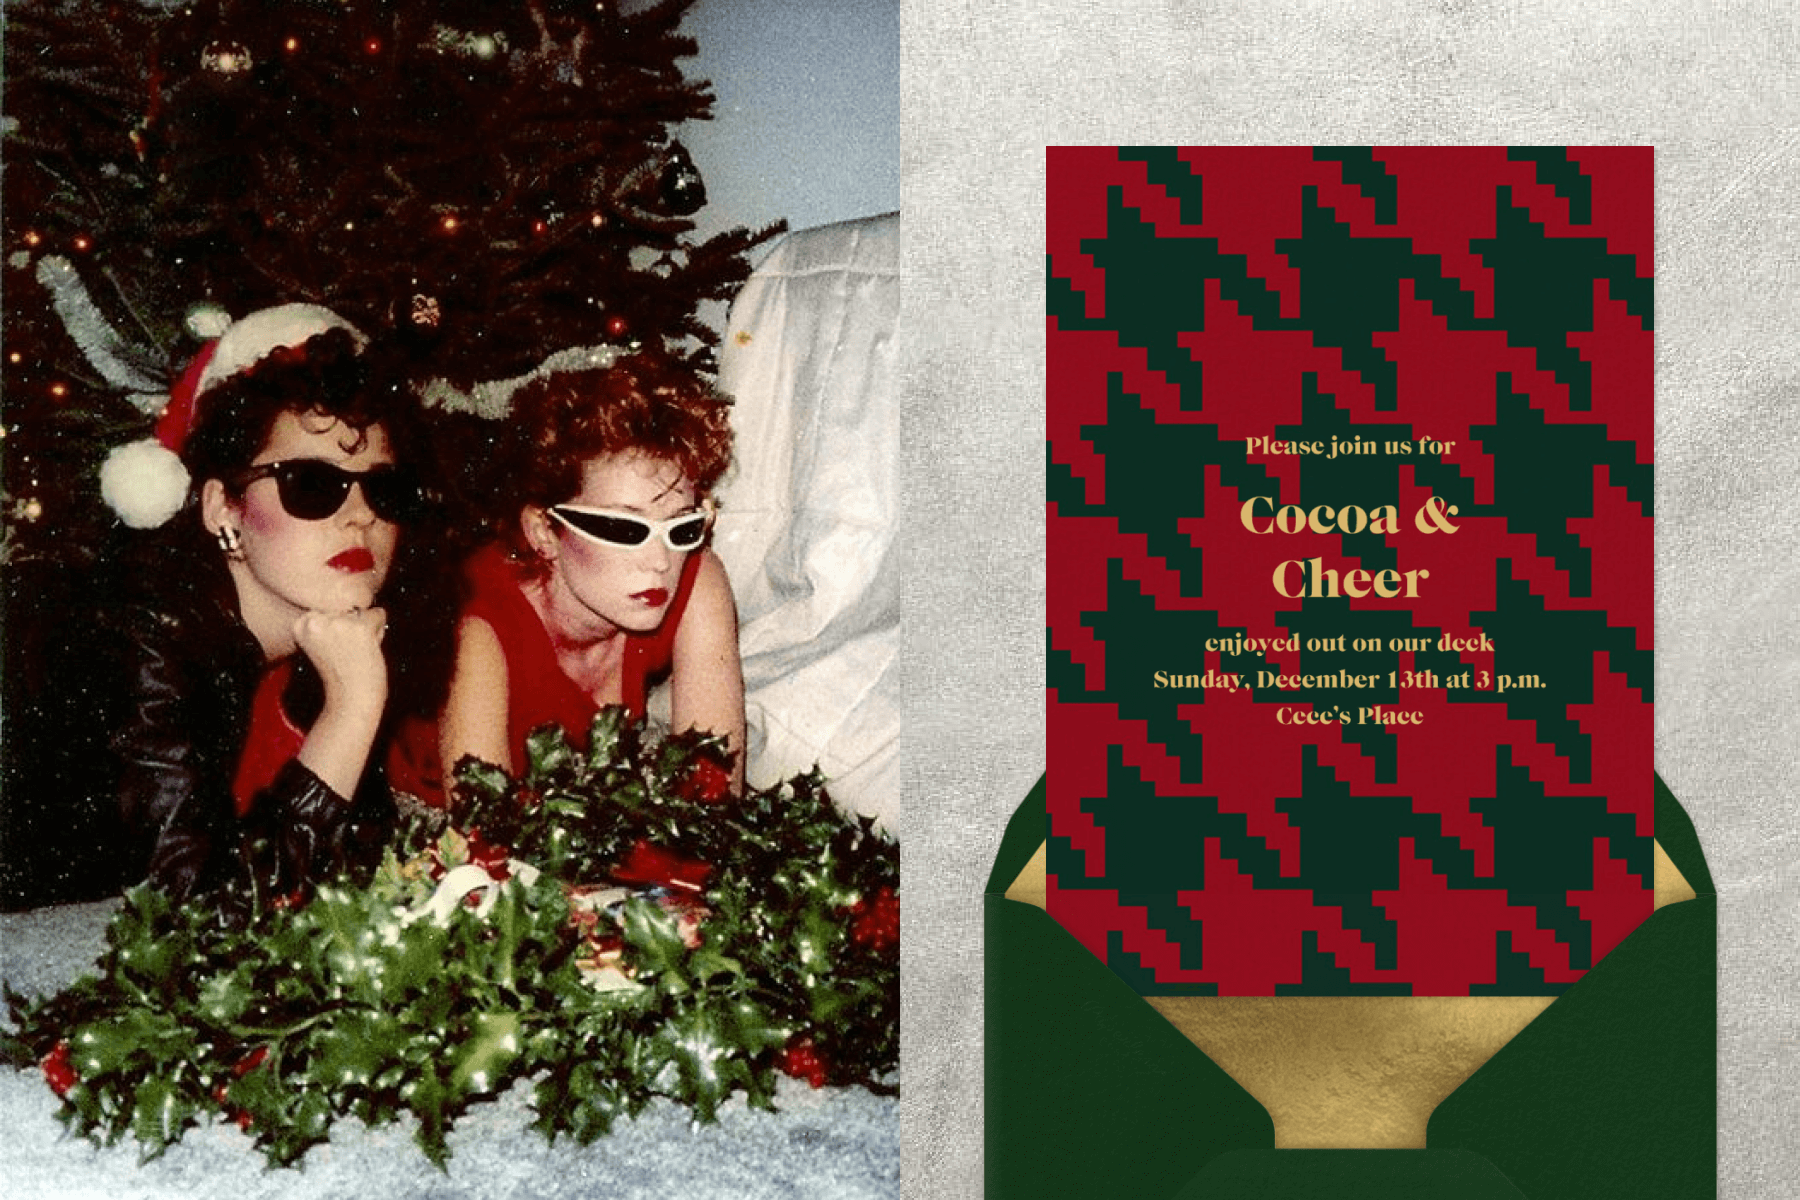 Two women in 1980s Christmas-themed attire plus sunglasses with a pile of holly leaves; an invitation with oversized red and green houndstooth pattern.